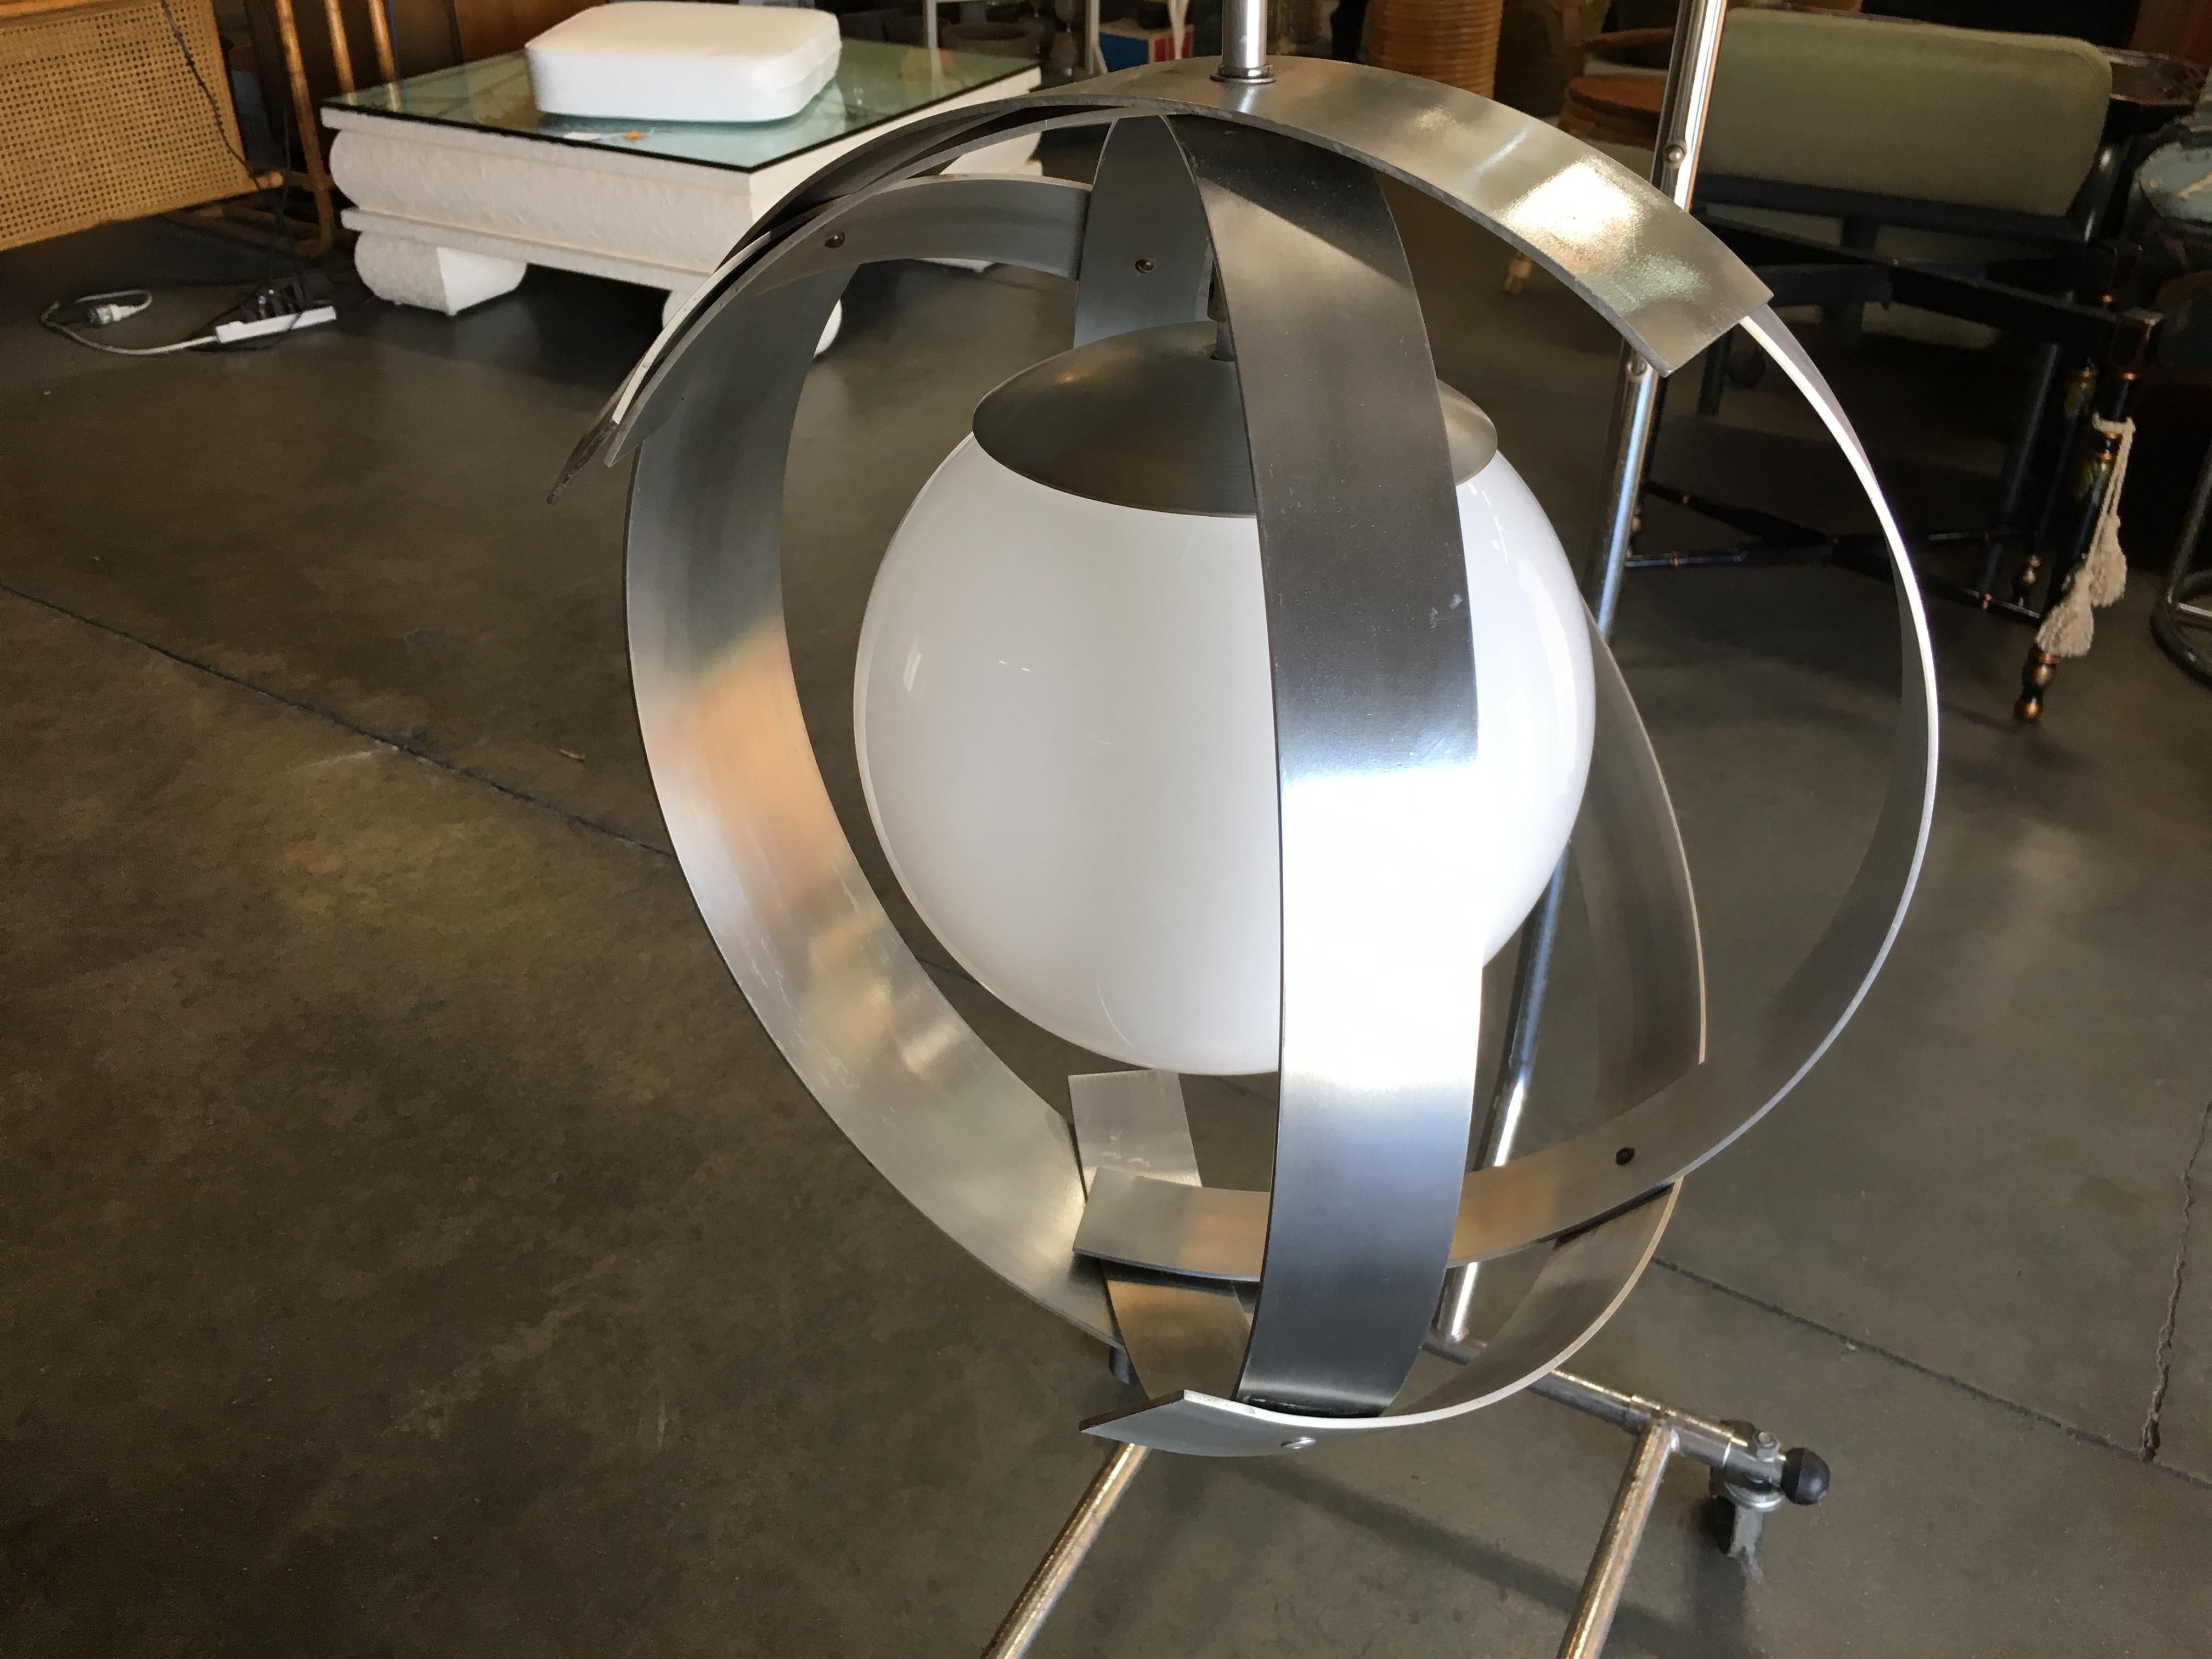 Midcentury Abstract Aluminum Strip Ribbon Globe Chandelier In Excellent Condition For Sale In Van Nuys, CA